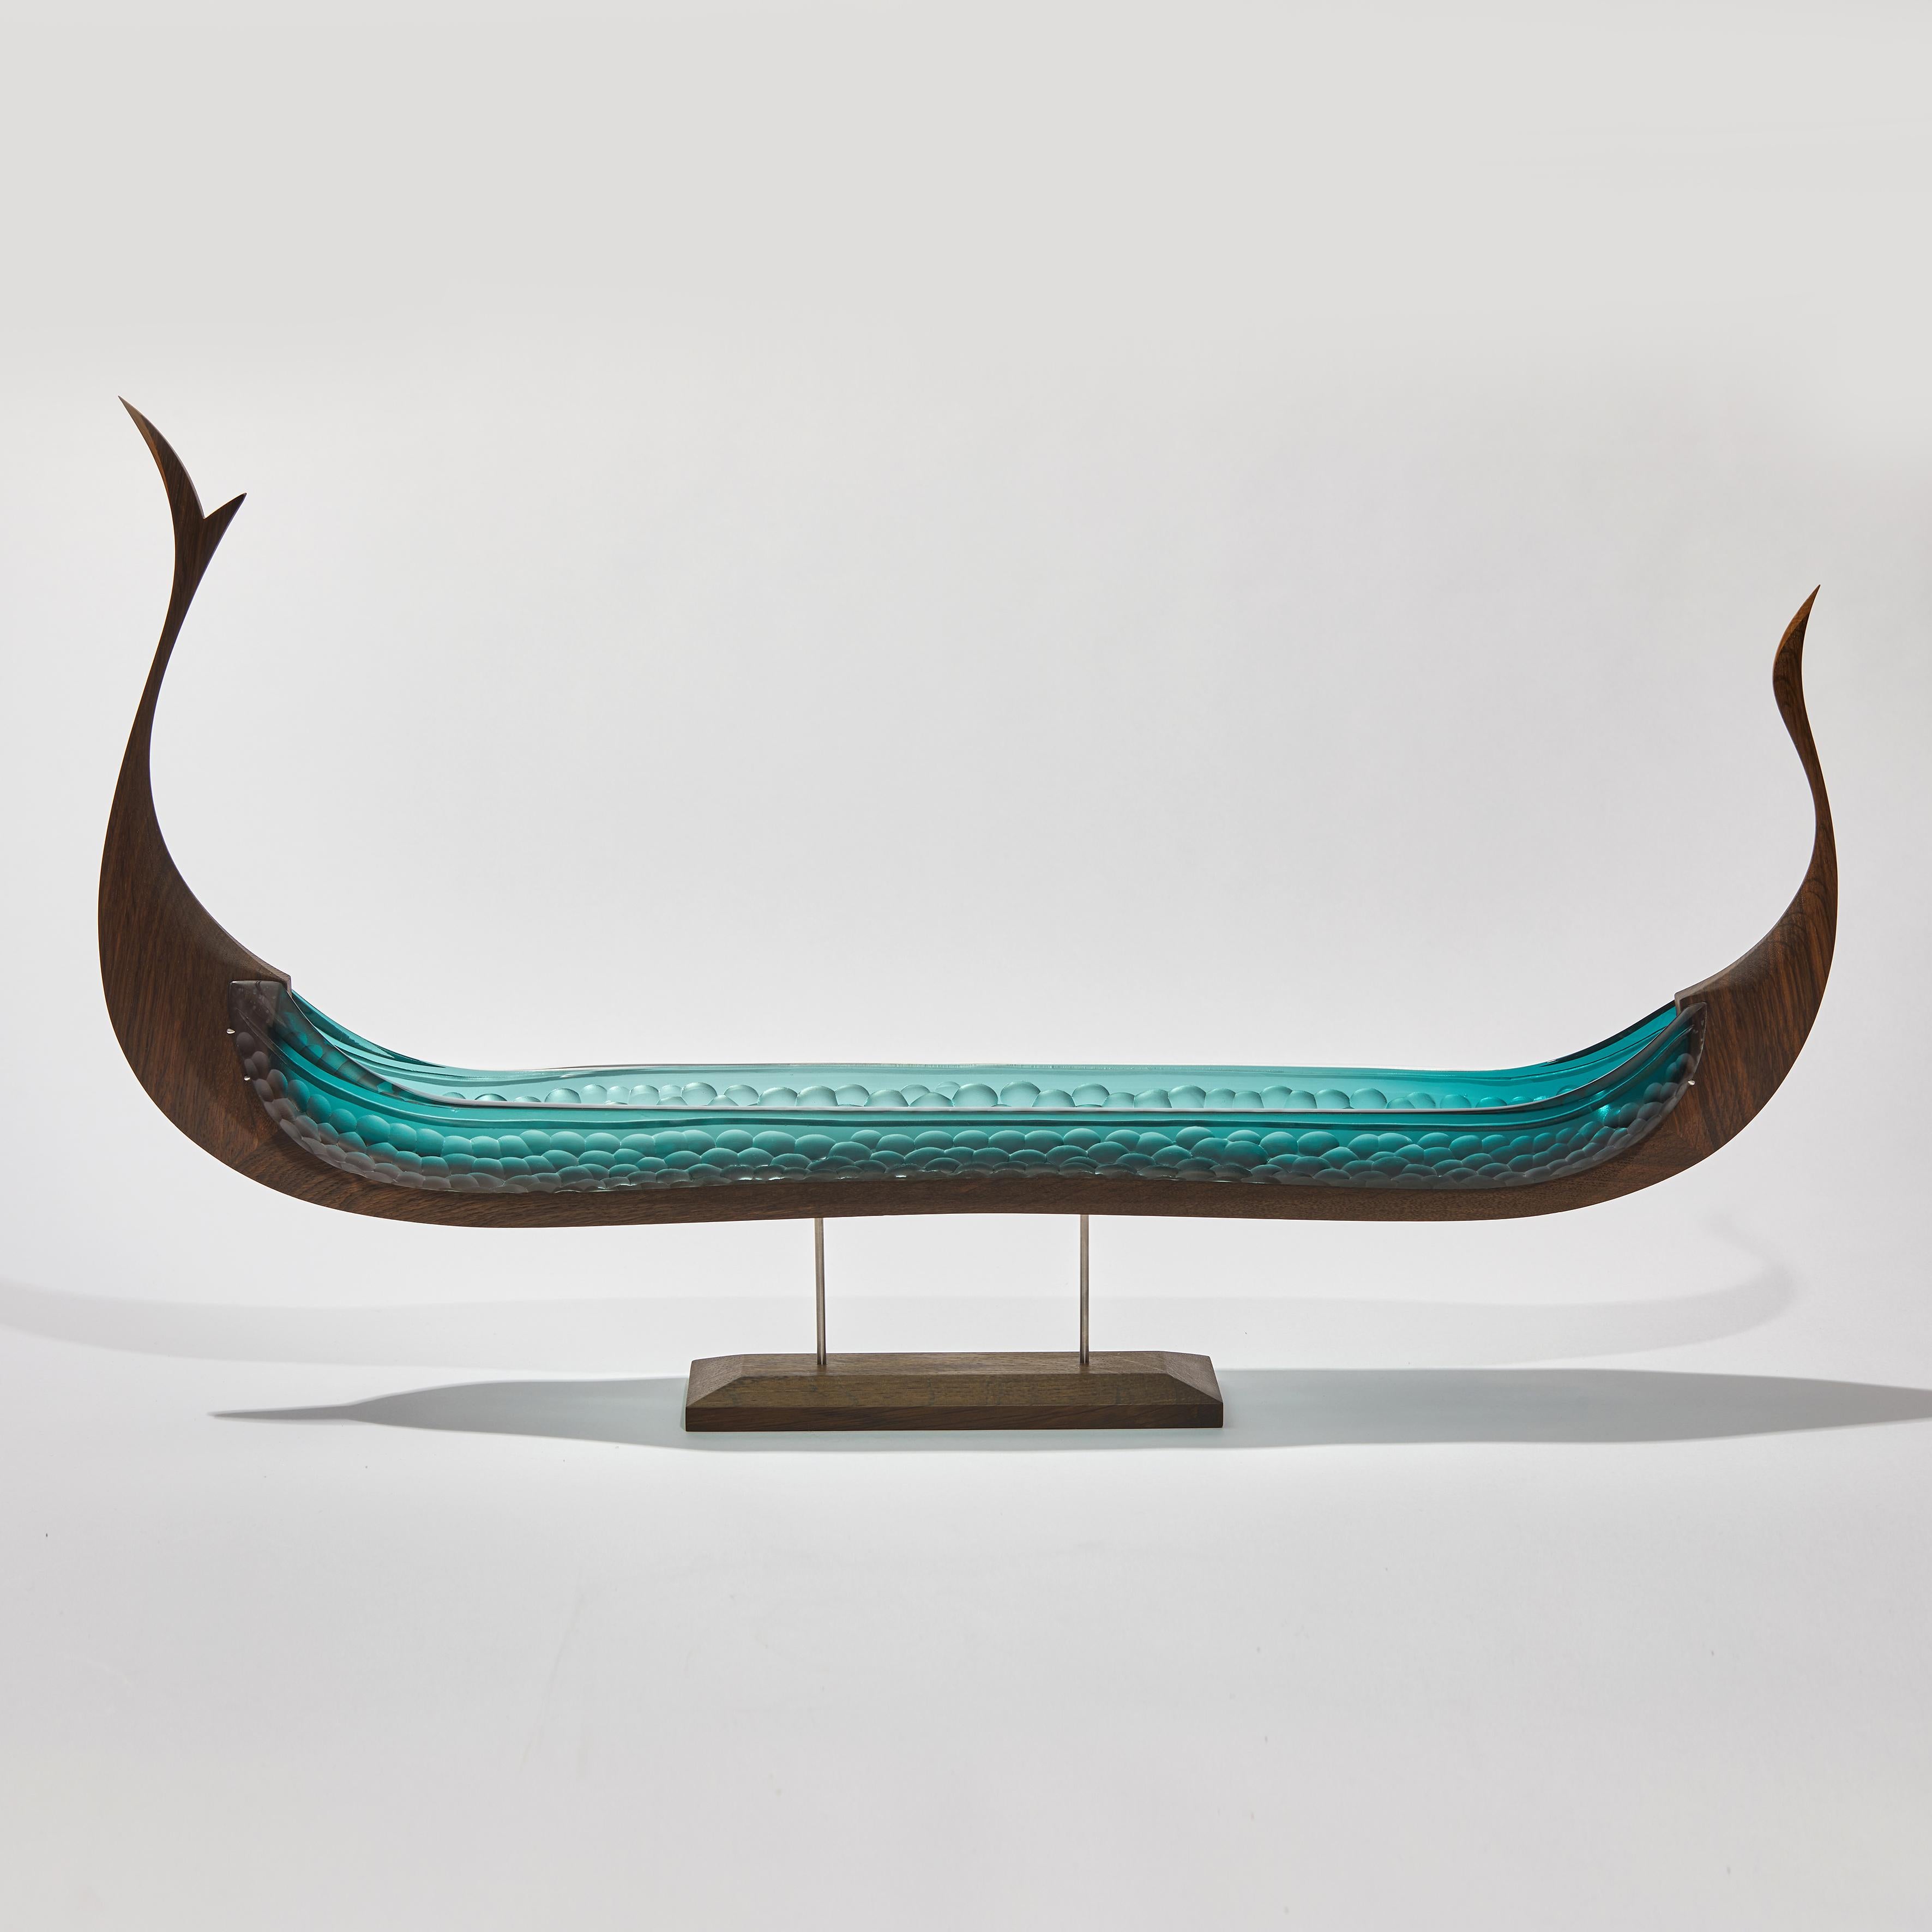 Fine cabinet making & crafted oak with handblown & cut jade glass combine to create this unique sculpture 'Konge' from the Glasskibe Collection. Created in collaboration by the Danish and British artists, Backhaus & Brown and Egeværk.

The title